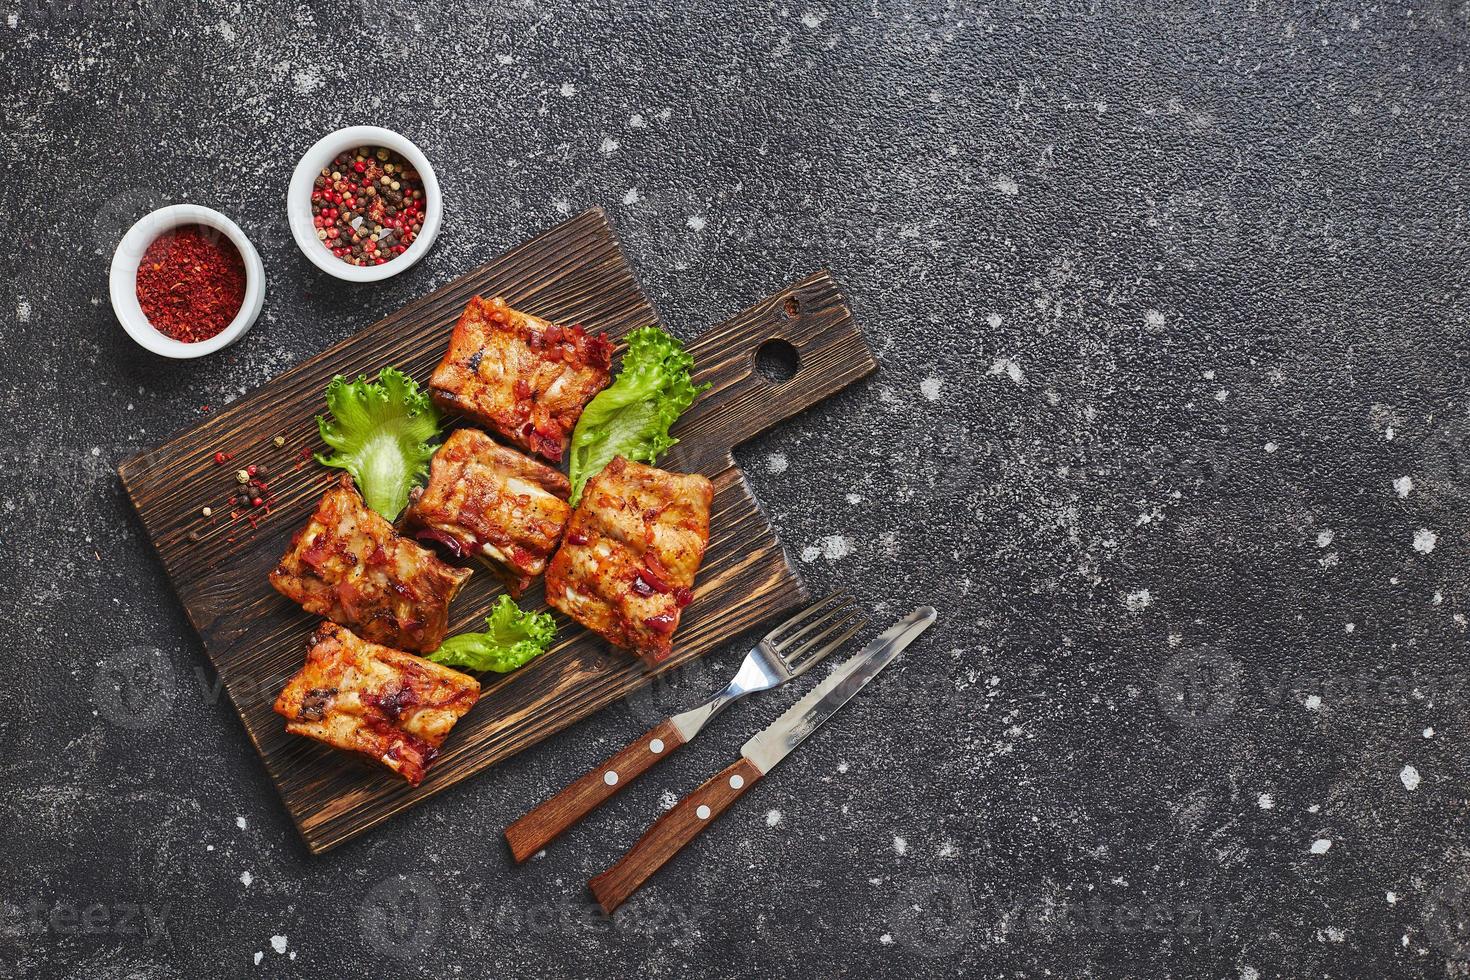 Grilled baked pork ribs with spices and vegetables on wooden cutting board on dark background. American food concept. Top view, copy space. photo